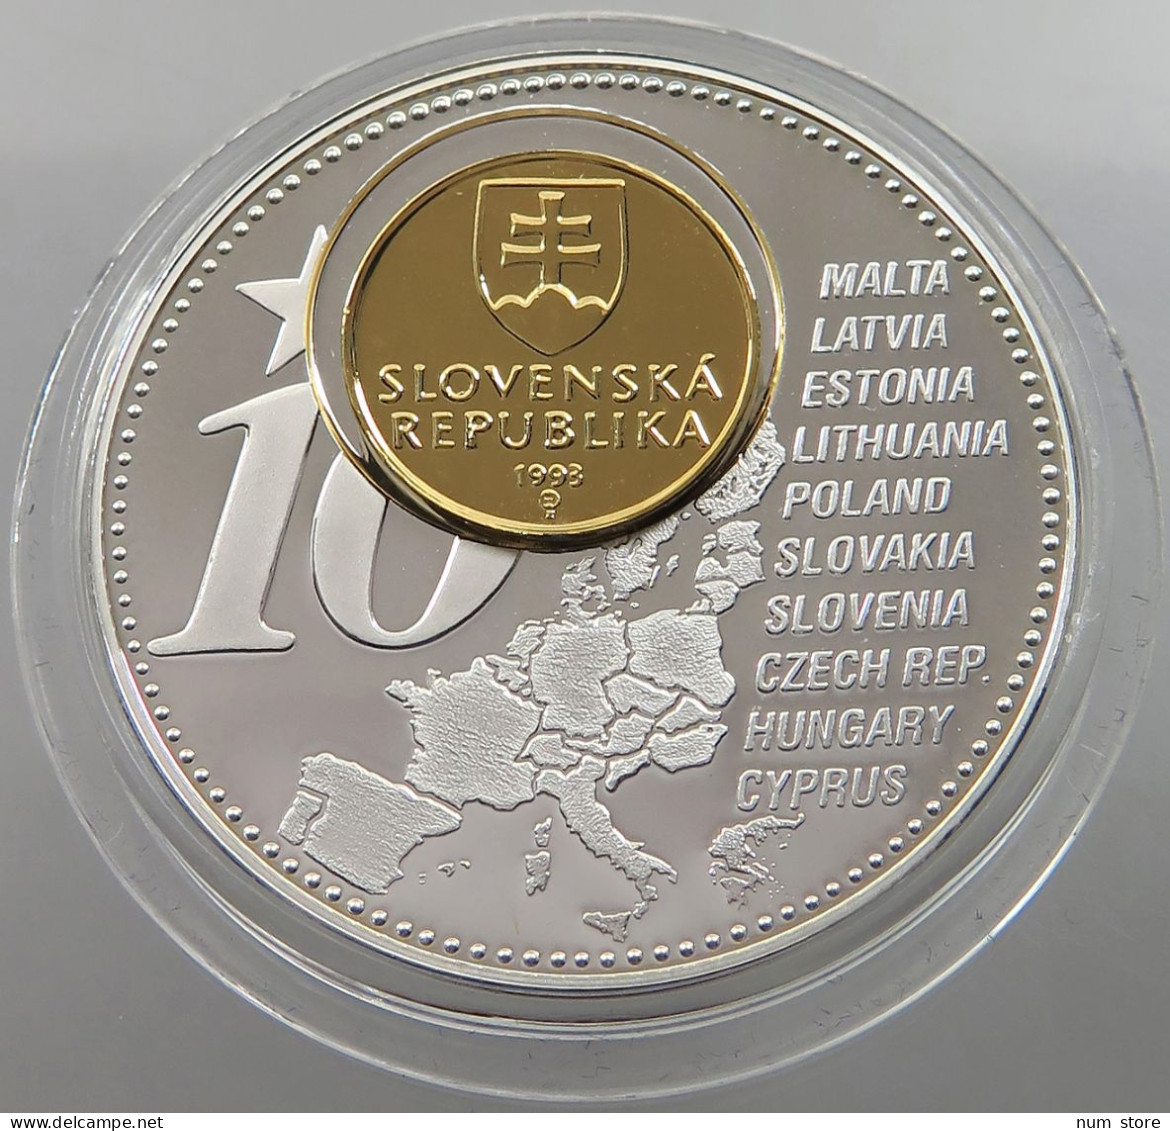 SLOVAKIA MEDAL 2006 THE FORTHCOMING NEW EURO COUNTRIES #sm06 0695 - Slowenien